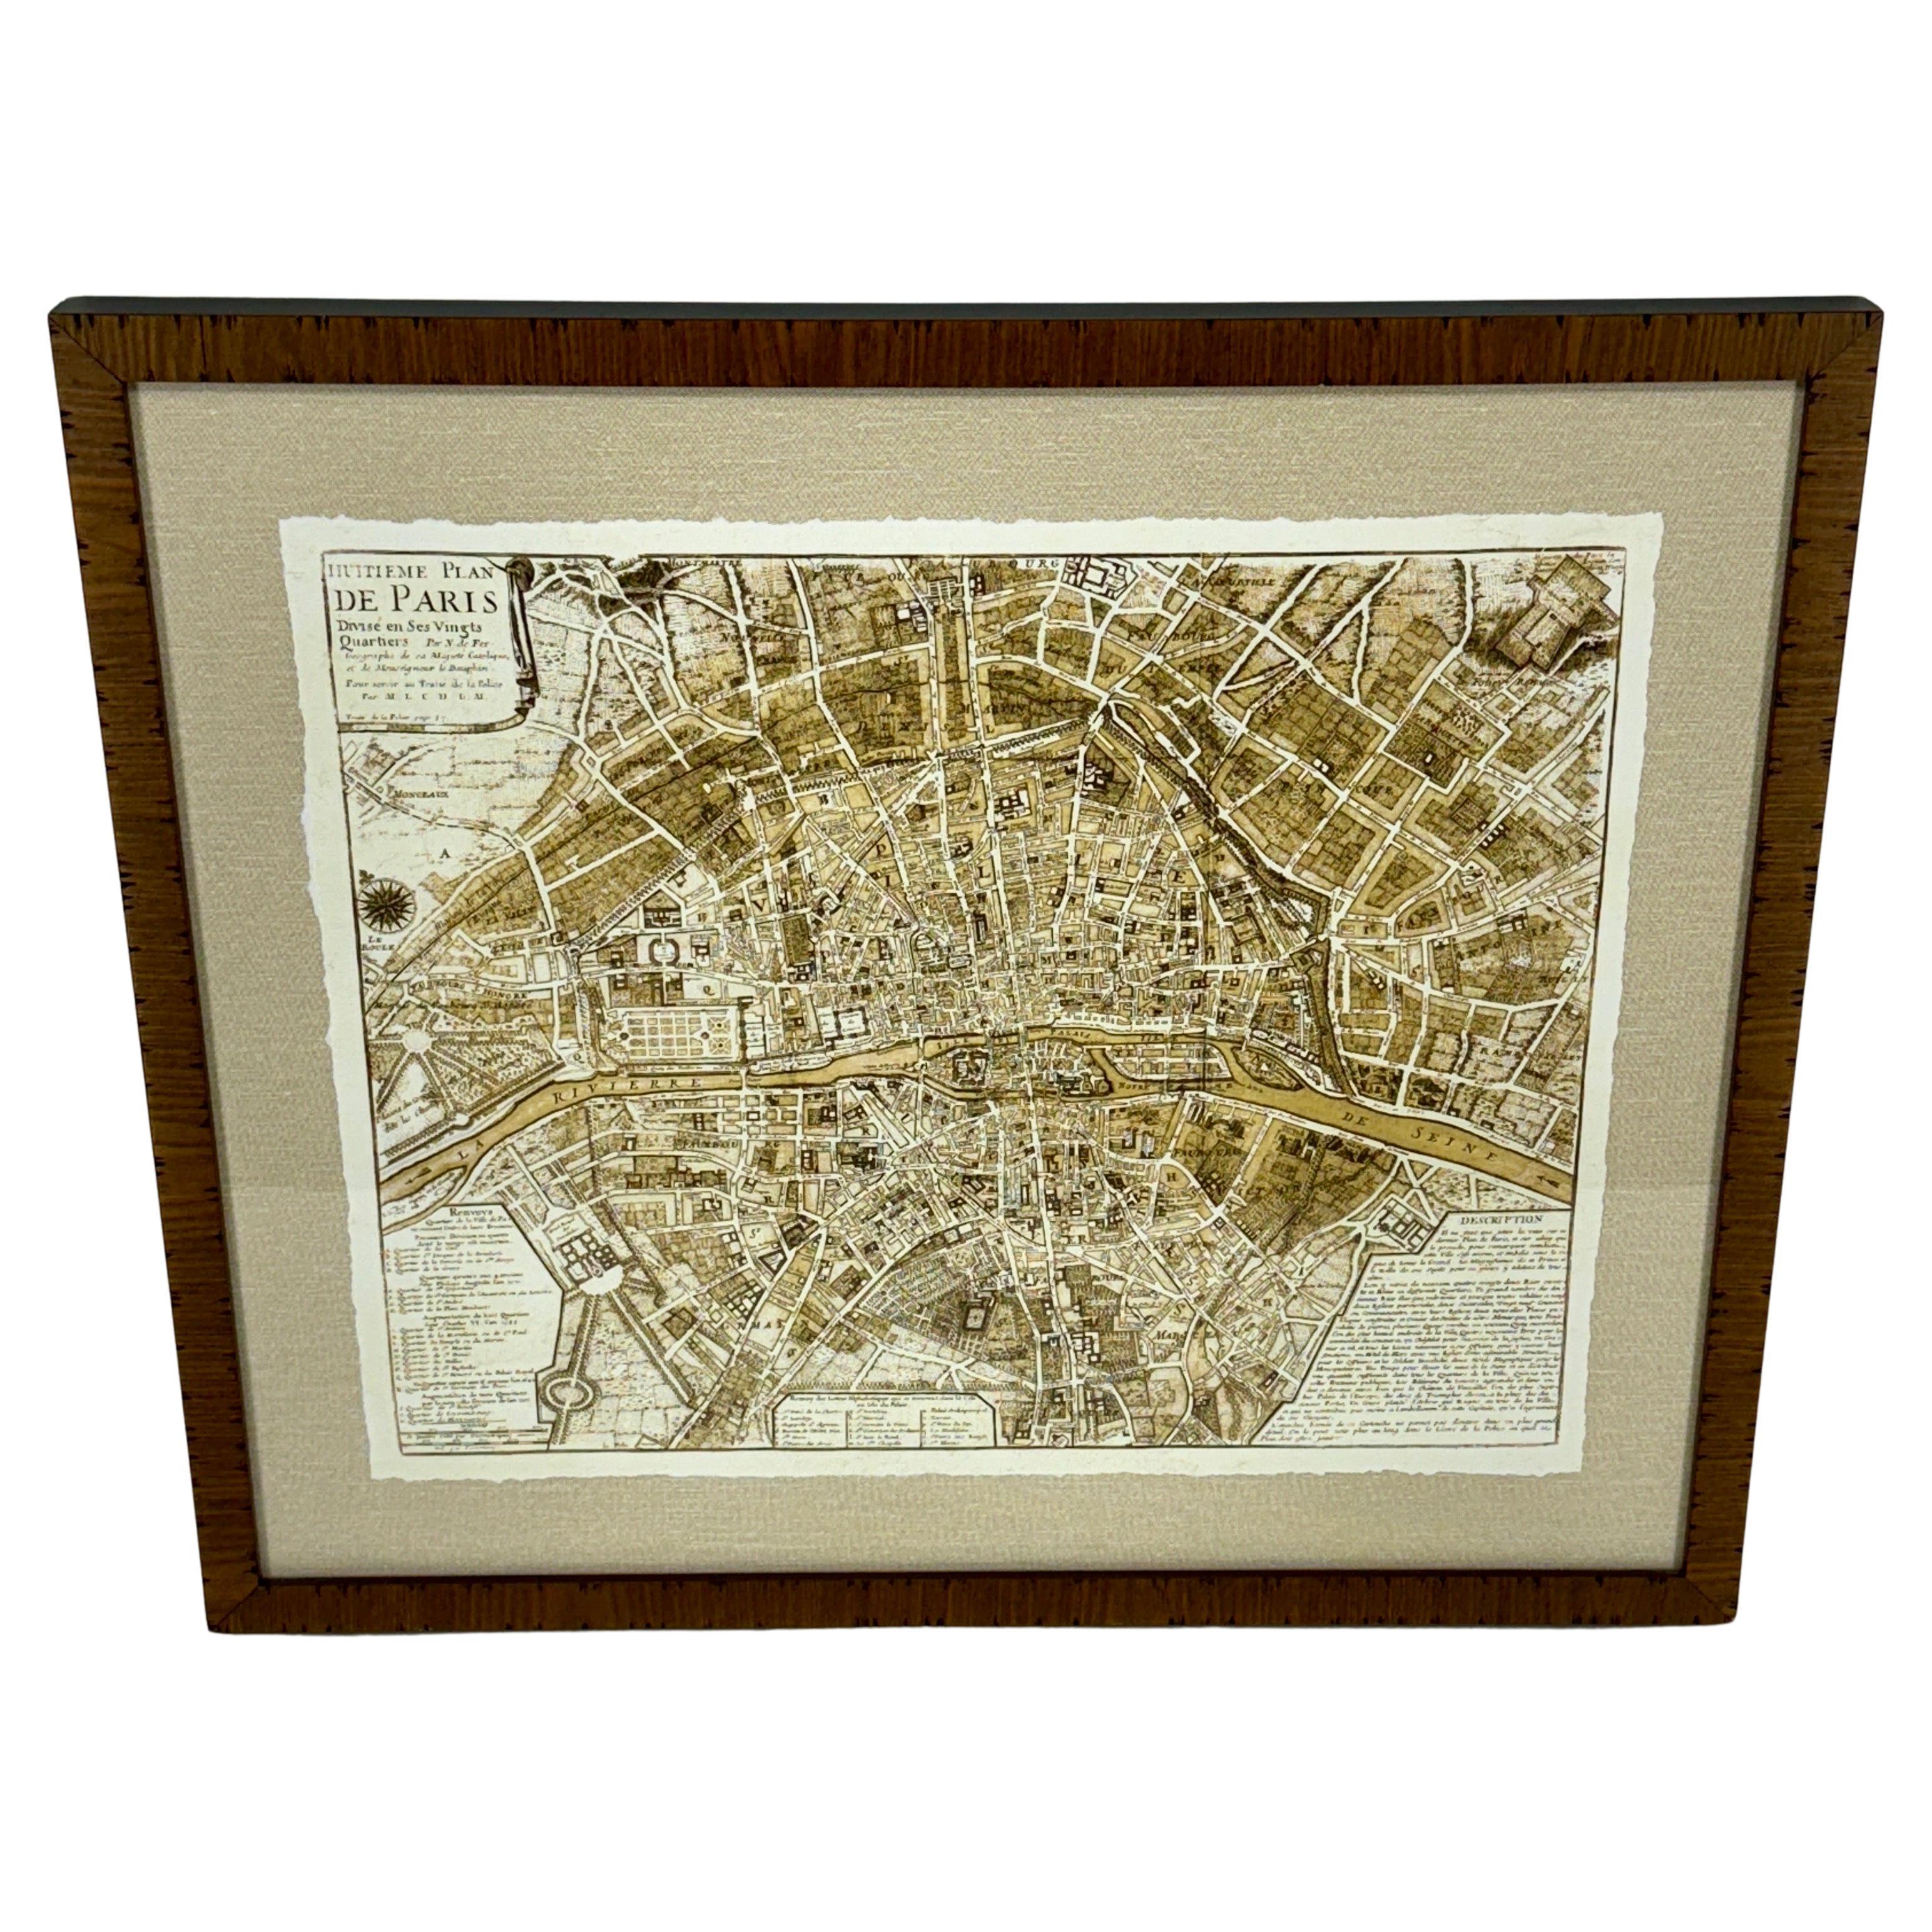 Custom Wooden Framed Map of 1700's Hundreds Paris, France. 

This reprint of the early antique map of the capital and most populous city in France has been deckled over a neutral colored linen mat. This artwork was purchased in France and was later